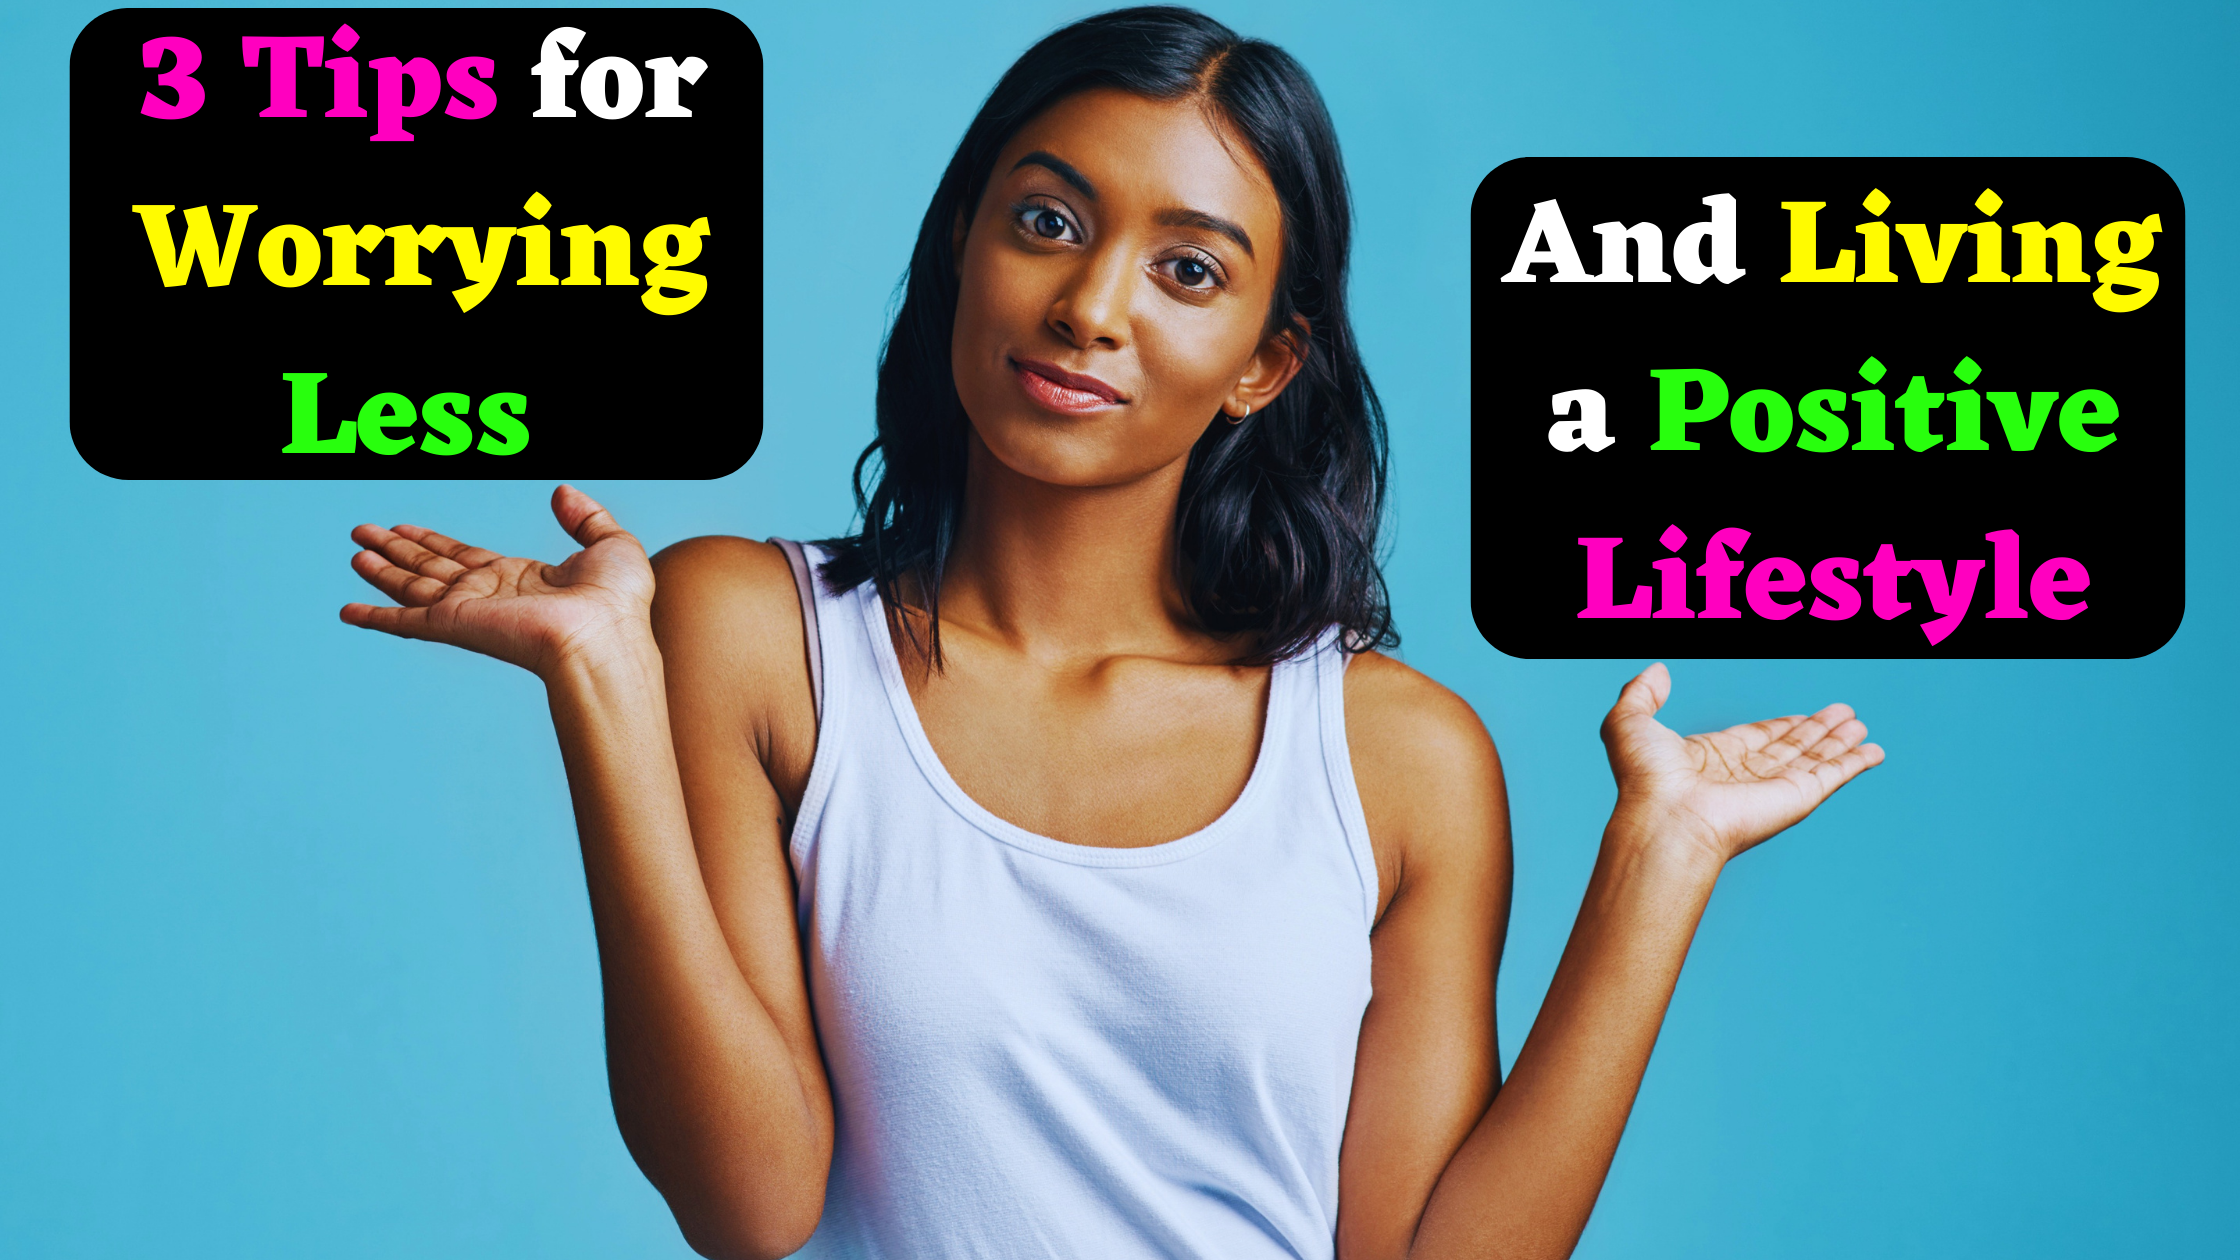 3 Tips for Worrying Less and Living a Positive Lifestyle